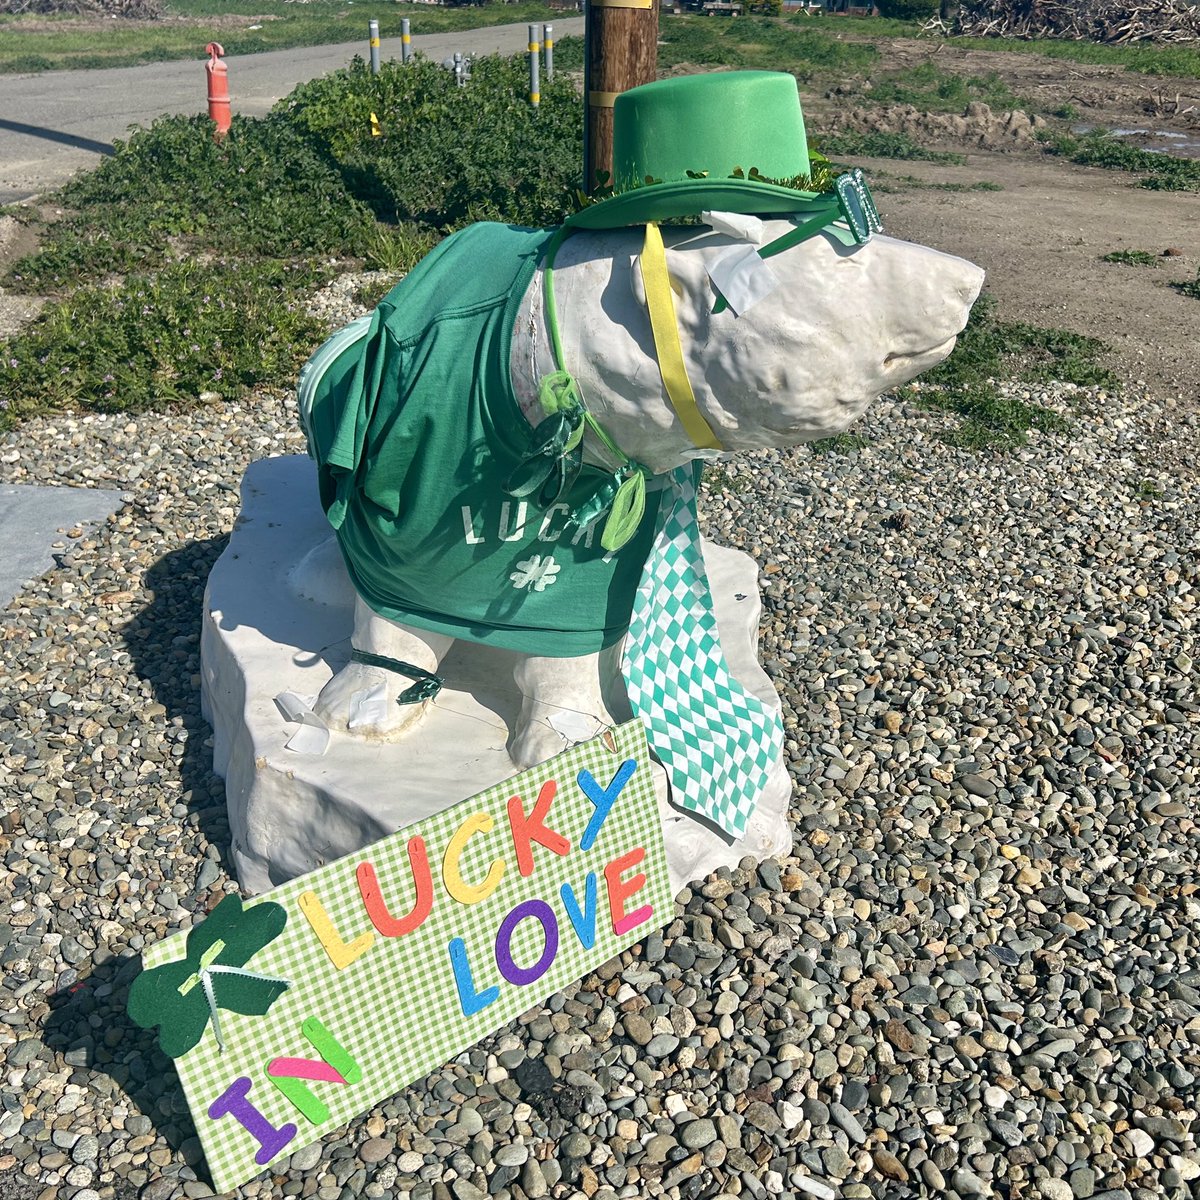 Happy St Patricks Day, this is Love.  He lives across the #sacramentoriver from us in #suttercounty @CountyofSutter @SeeYubaSutter #sacvalley @NCWATweets